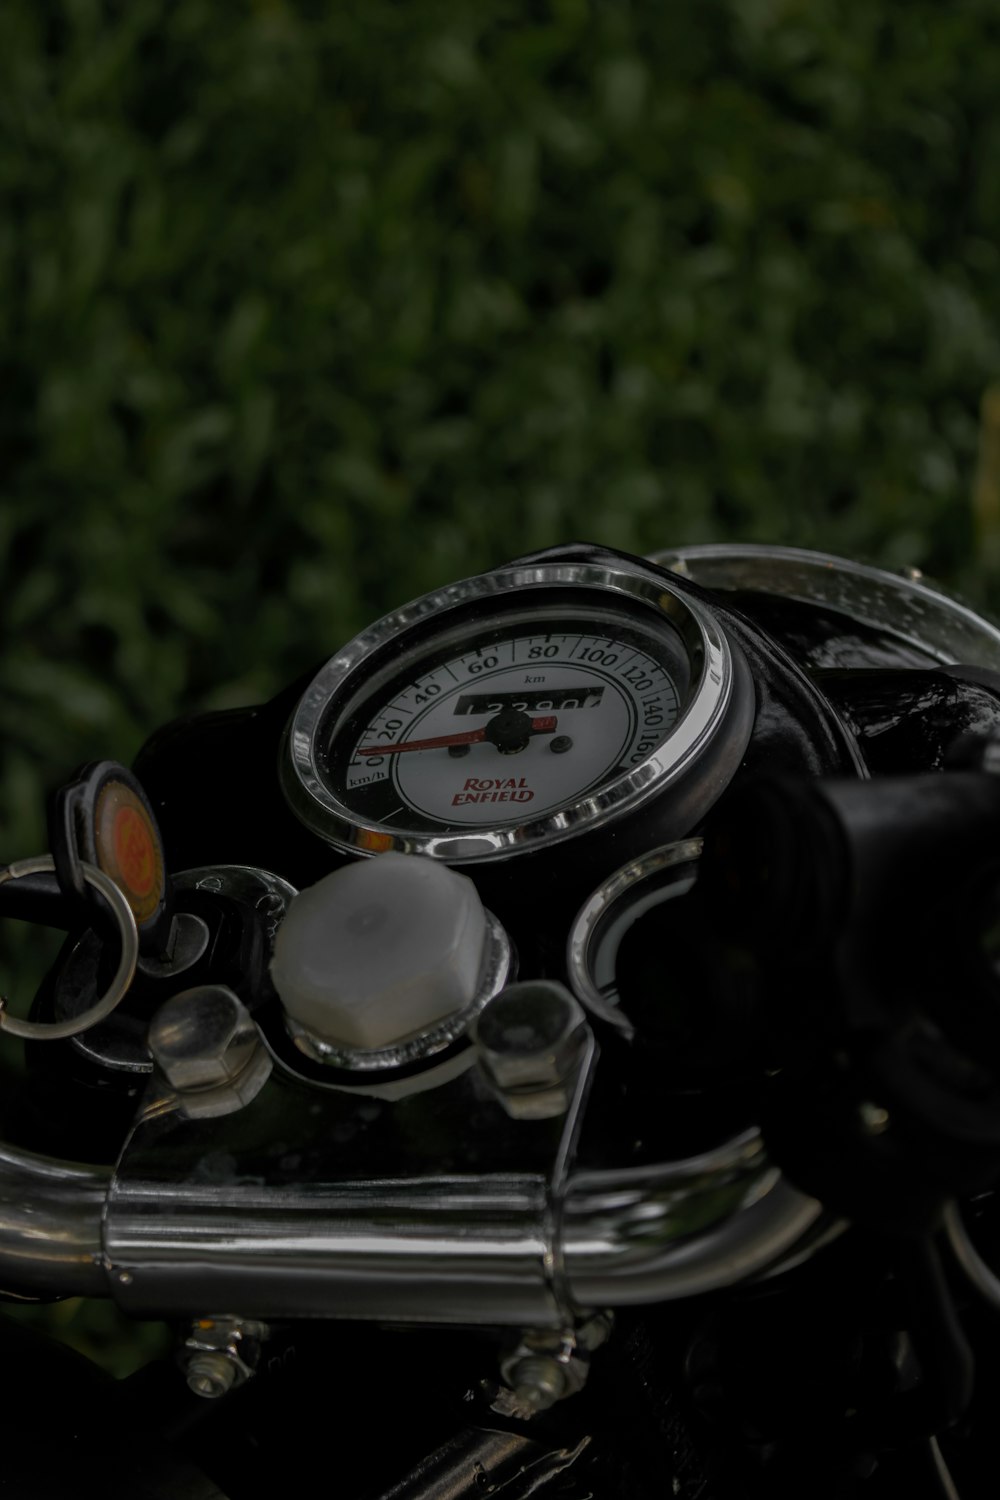 a close up of a motorcycle with a speedometer